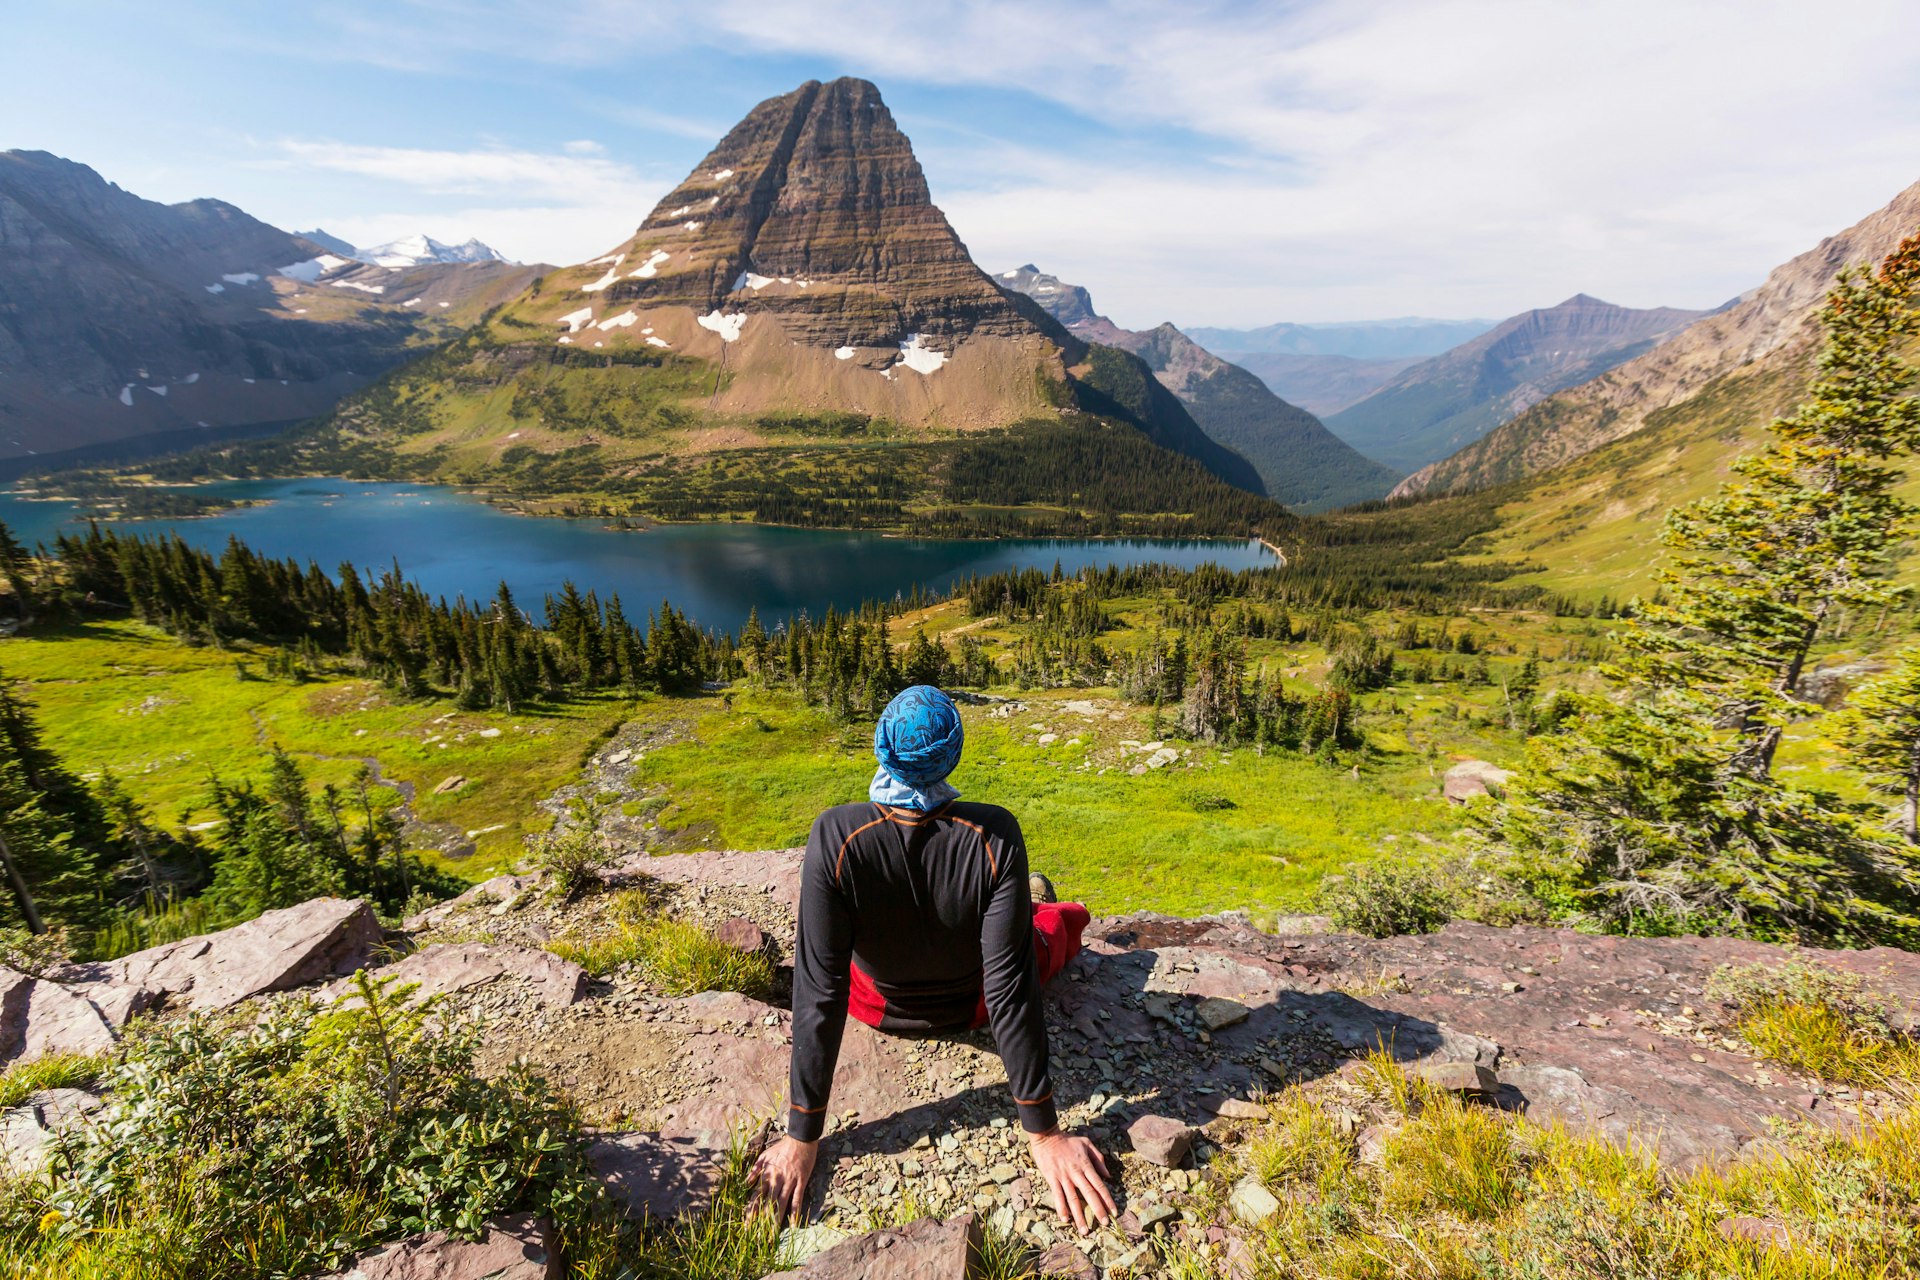 A hiker sits on a rock looking out at a stunning landscape of peaks and lakes